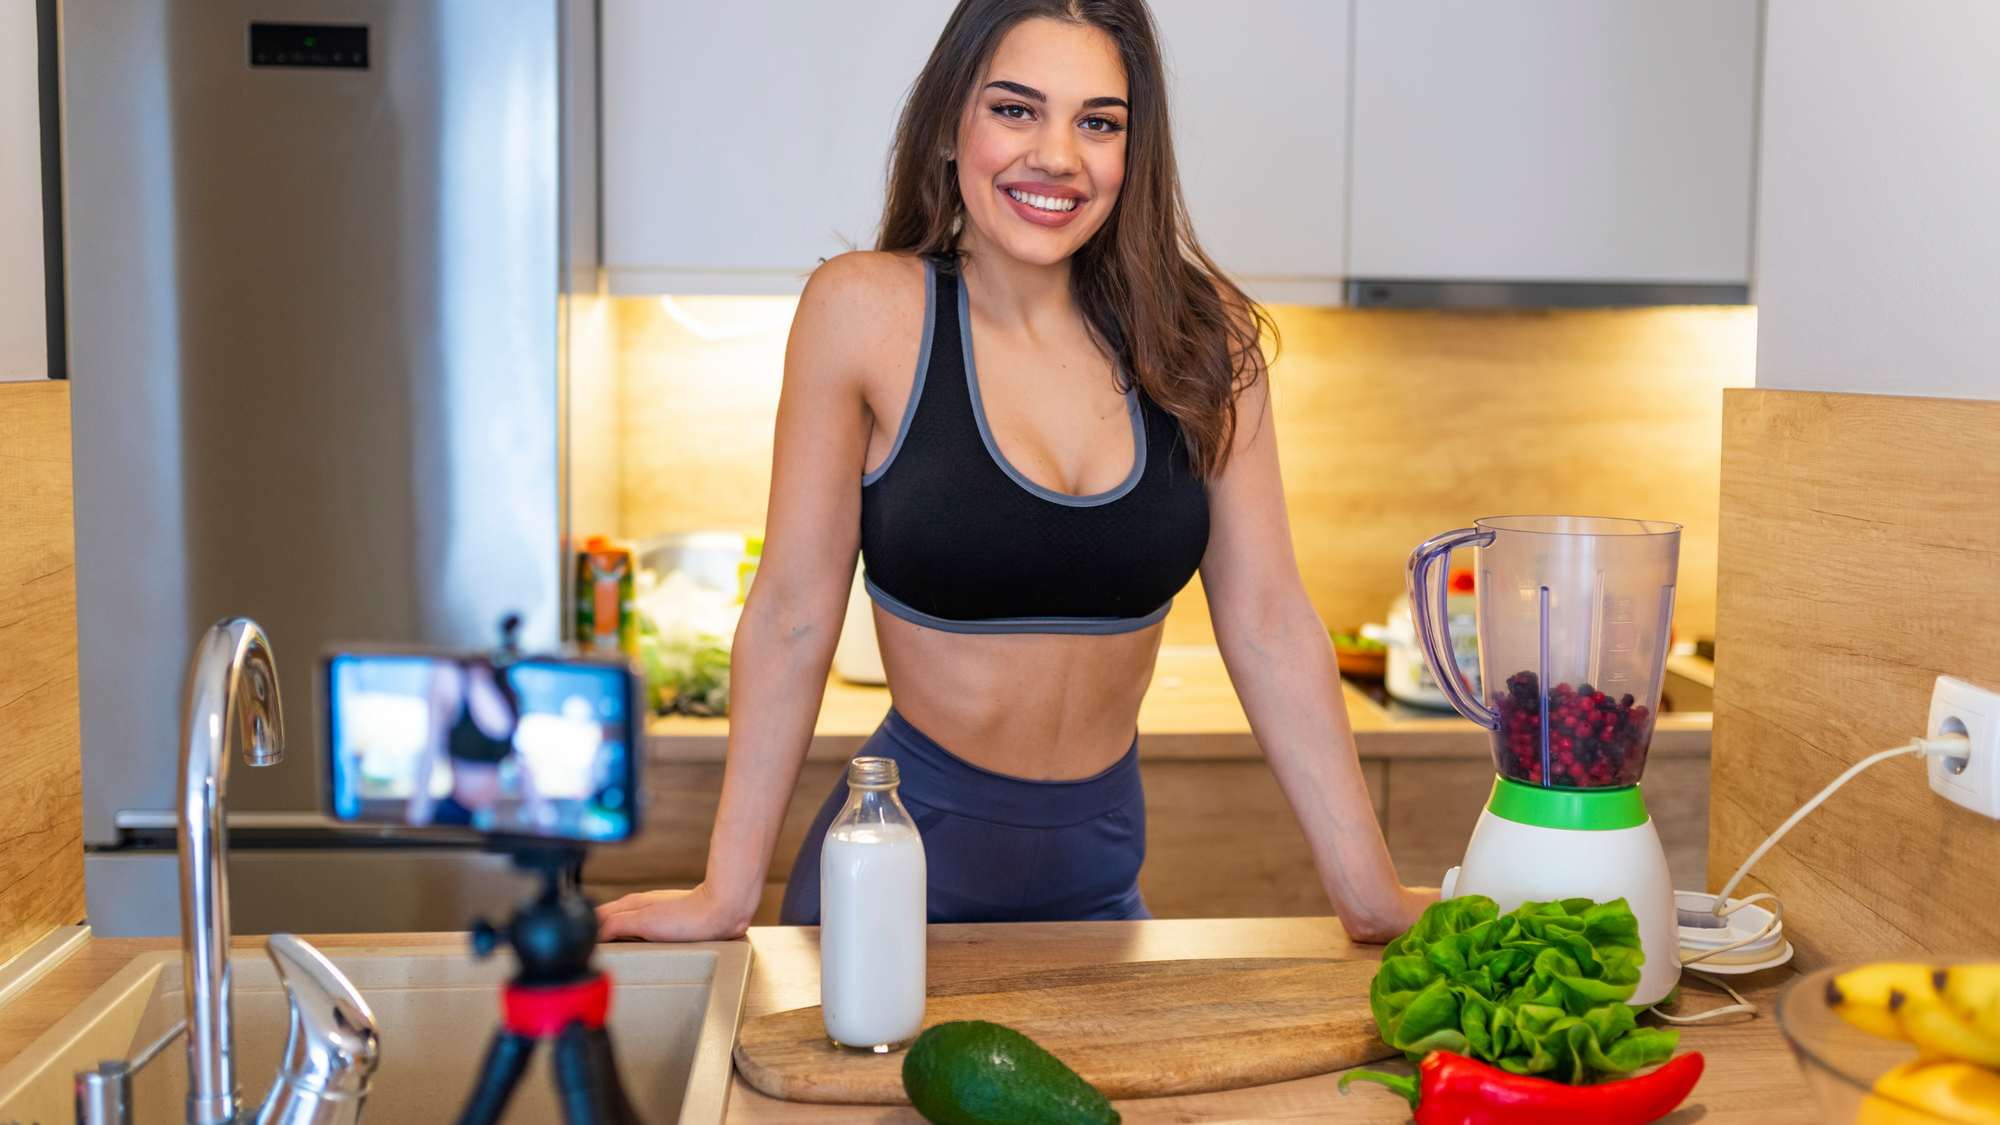 Food for Fitness: What to Eat Before a Workout